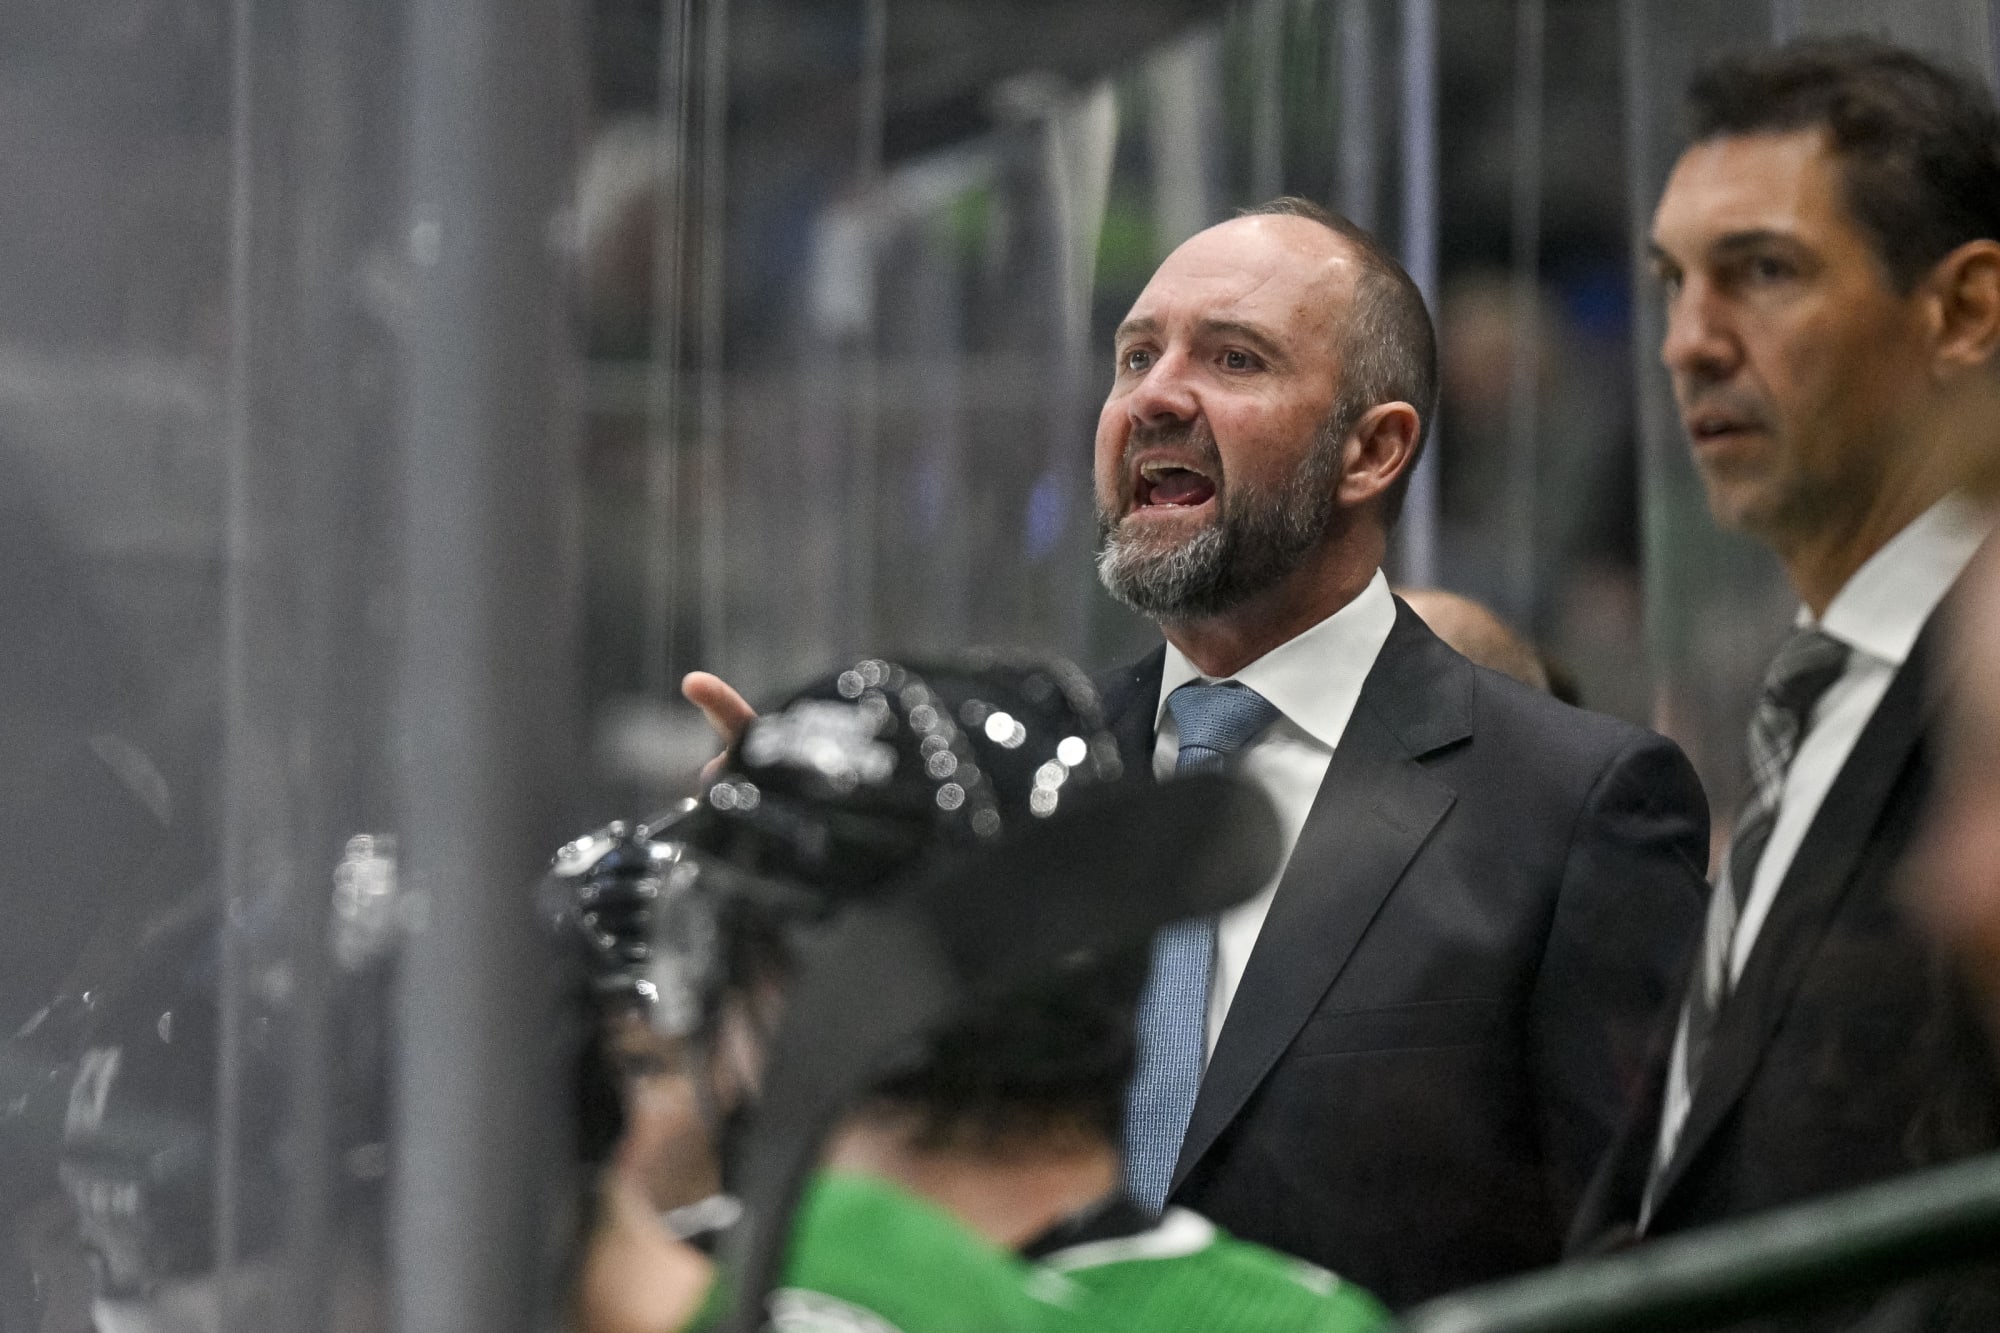 DeBoer’s style of play is not the reason for penalties